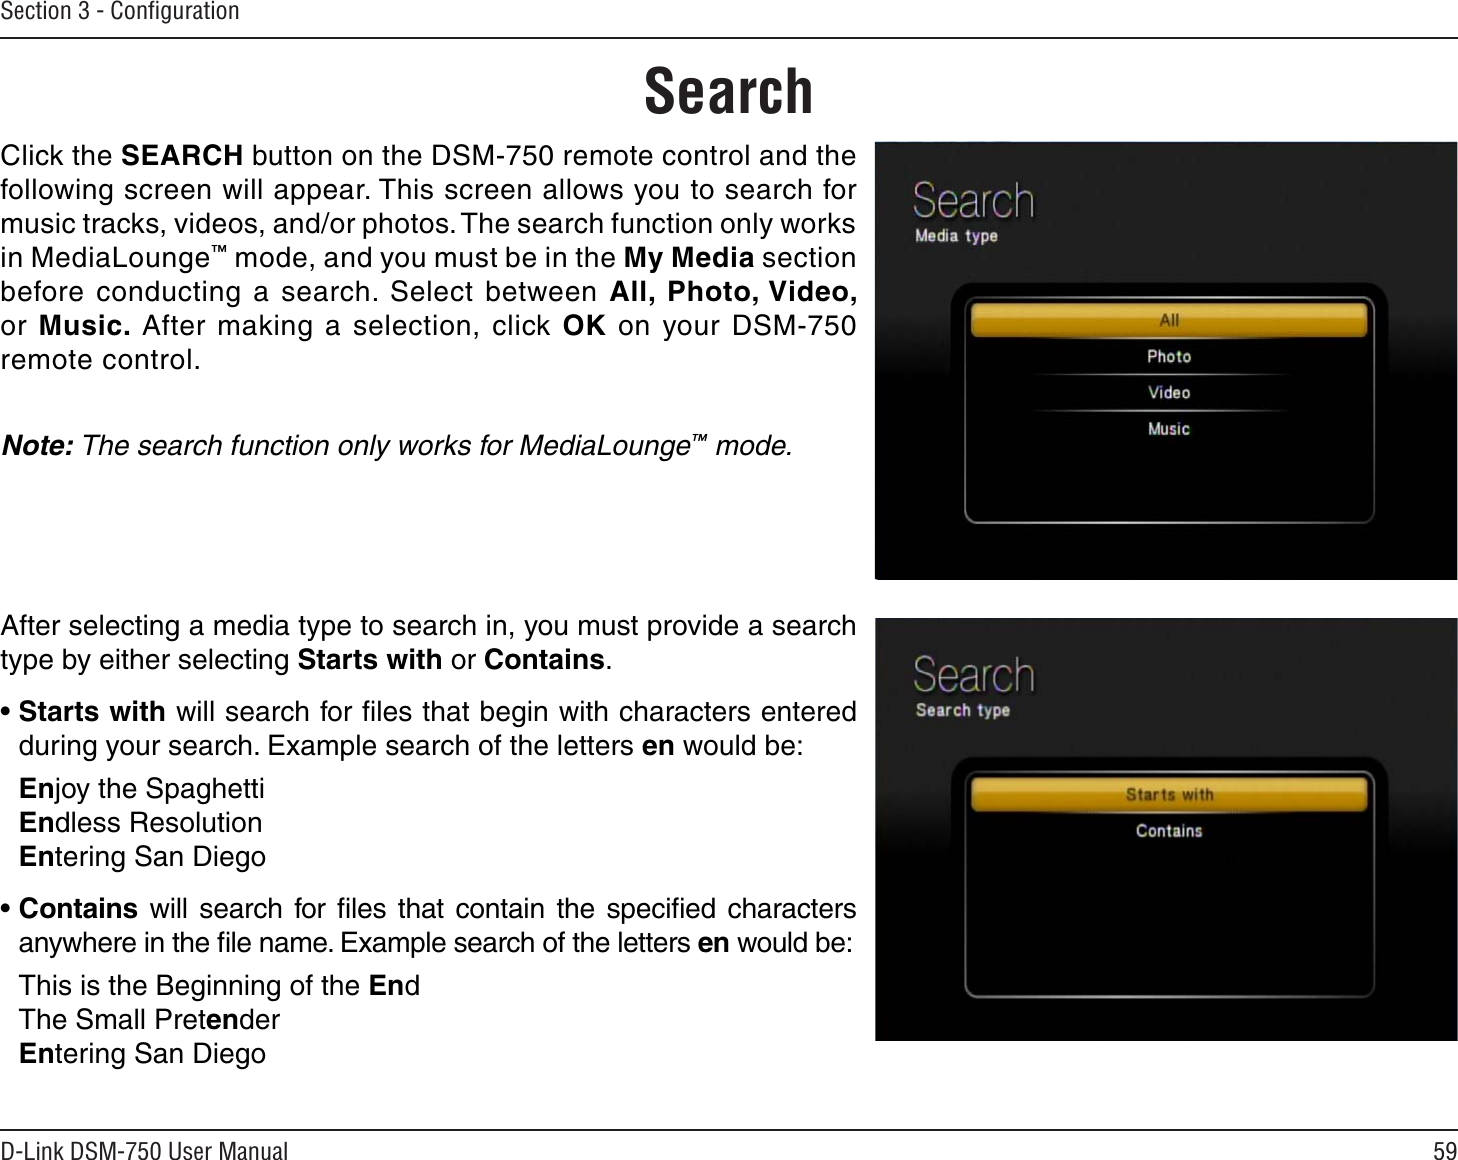 59D-Link DSM-750 User ManualSection 3 - ConﬁgurationSearchClick the SEARCH button on the DSM-750 remote control and the following screen will appear. This screen allows you to search for music tracks, videos, and/or photos. The search function only works in MediaLounge™ mode, and you must be in the My Media section before conducting a search. Select between All, Photo, Video, or Music. After making a selection, click OK on your DSM-750 remote control.Note: The search function only works for MediaLounge™ mode.After selecting a media type to search in, you must provide a search type by either selecting Starts with or Contains. •Starts with will search for ﬁles that begin with characters entered during your search. Example search of the letters en would be:Enjoy the SpaghettiEndless ResolutionEntering San Diego•Contains will search for ﬁles that contain the speciﬁed characters anywhere in the ﬁle name. Example search of the letters en would be:This is the Beginning of the EndThe Small PretenderEntering San Diego